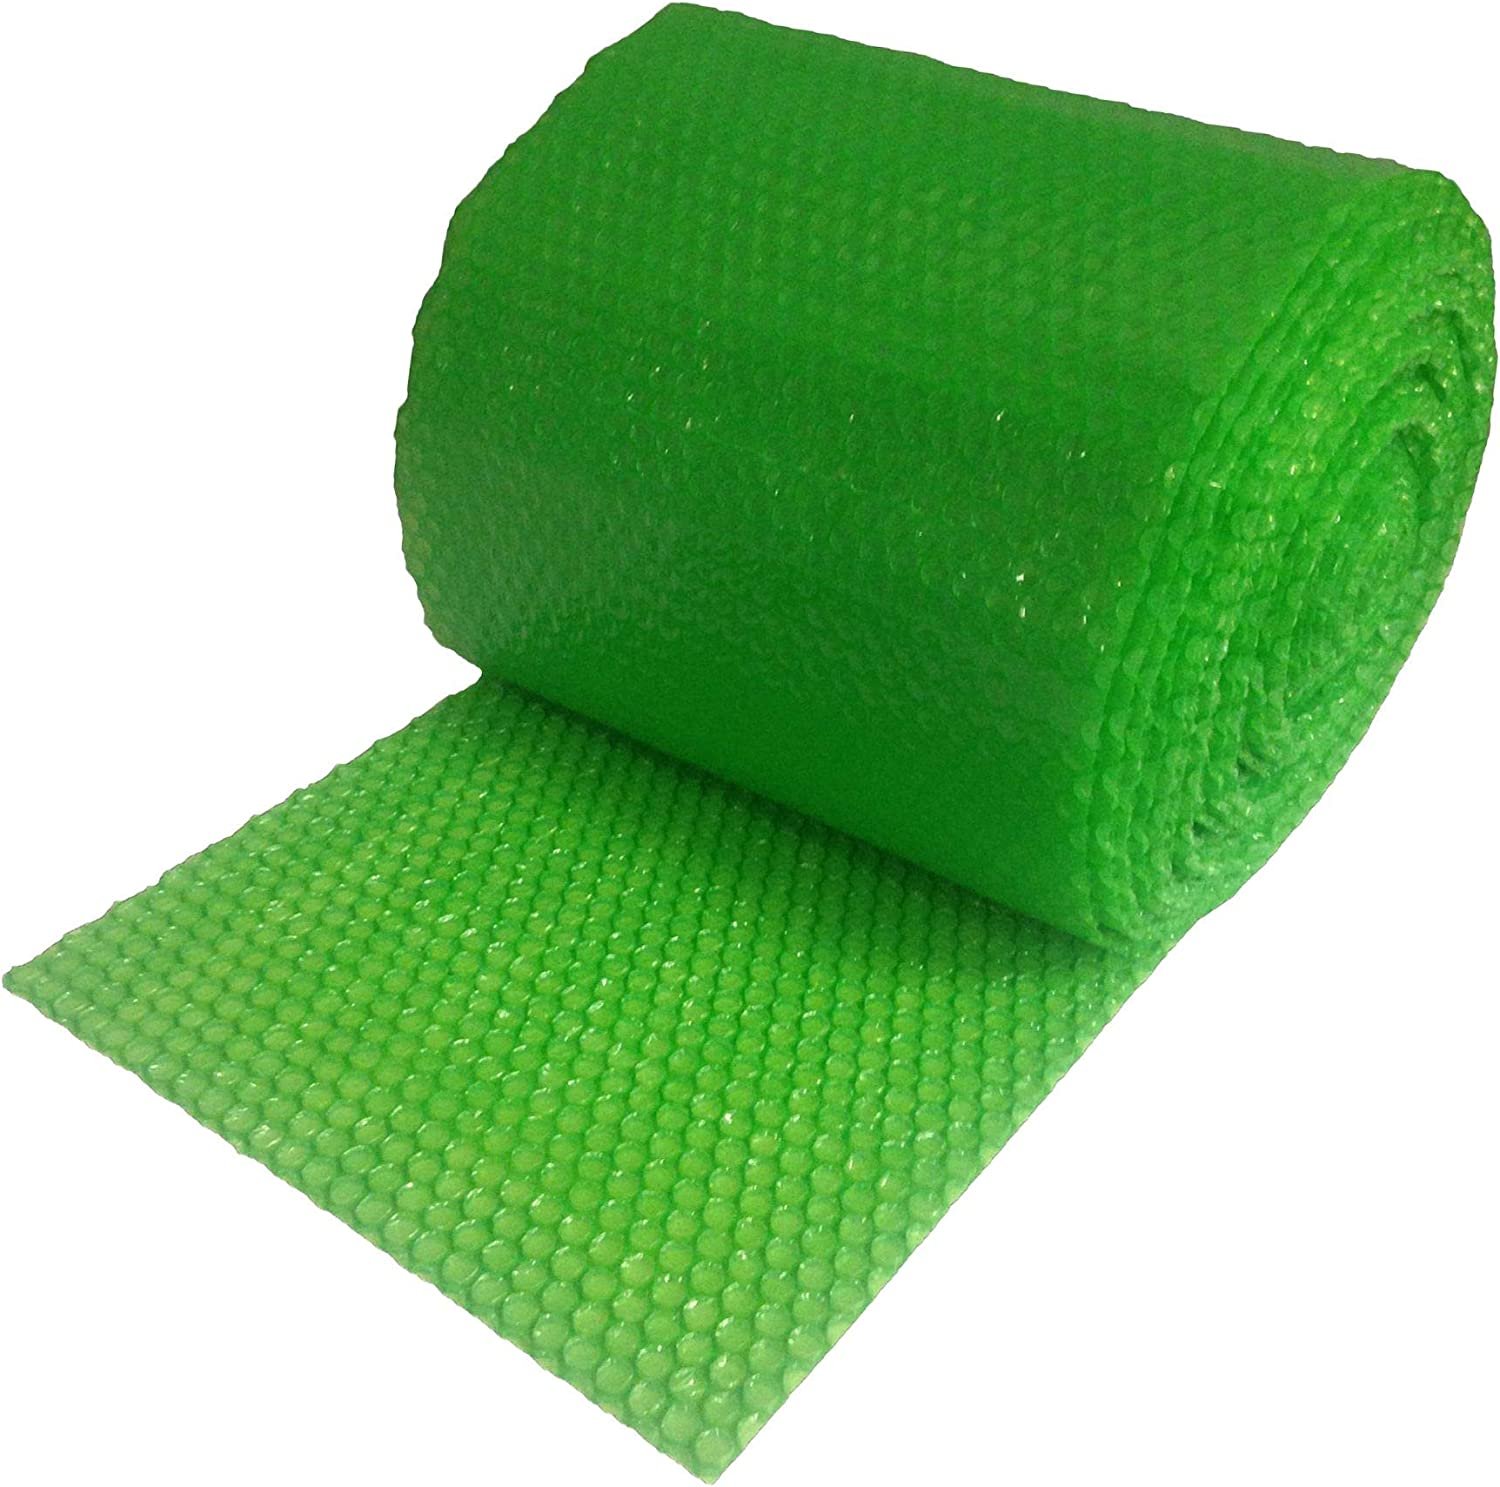 Recycled Small Bubble Cushioning Wrap Padding Roll 50' x 12'' Wide 50FT Green